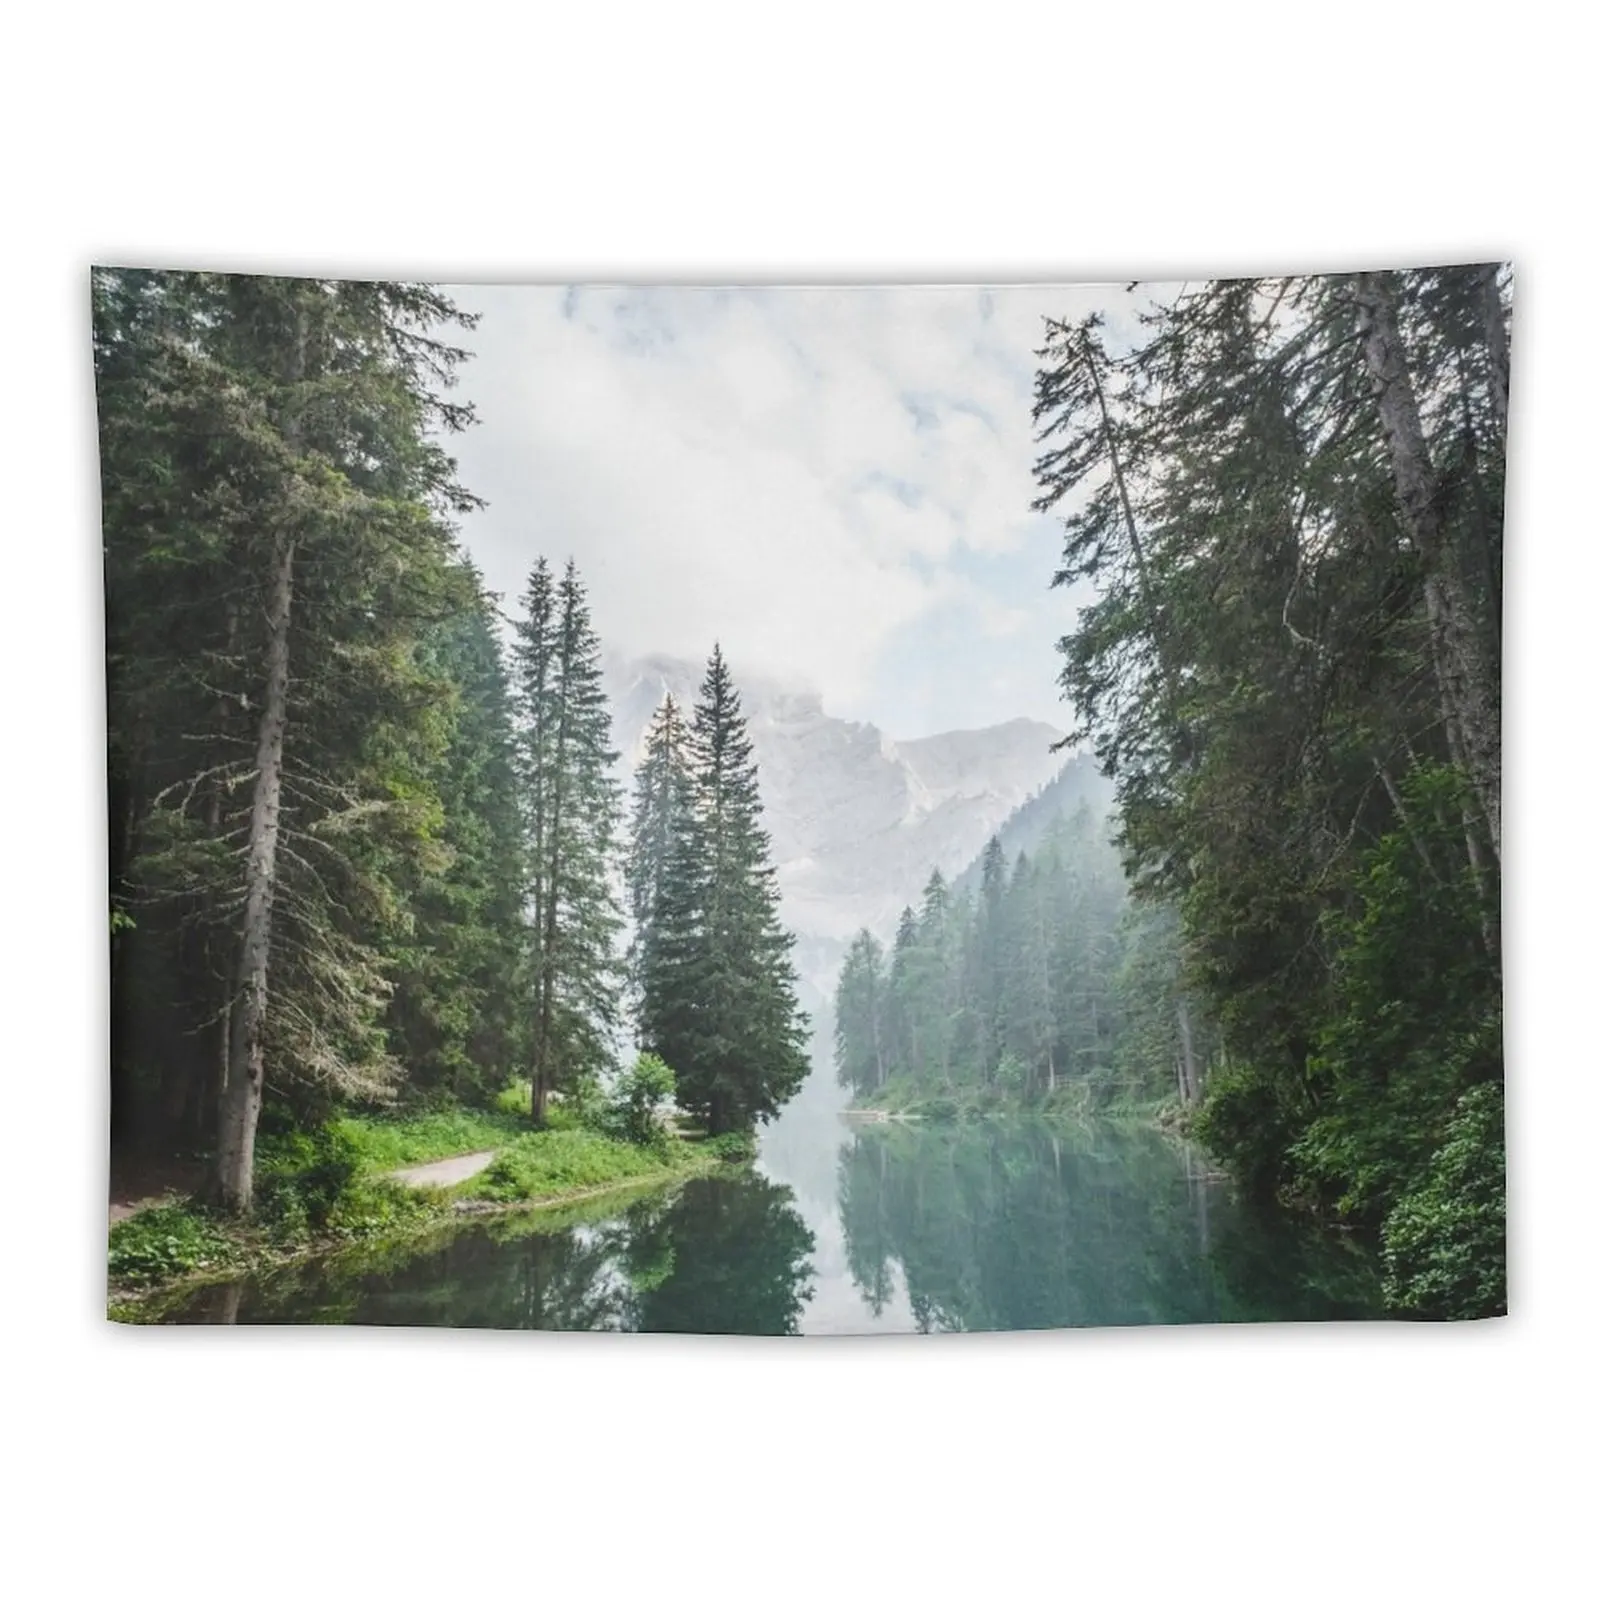 

Live the Adventure - Lago Di Braies X Tapestry Decor For Room Aesthetic Room Decor Korean For Bedroom Tapestry